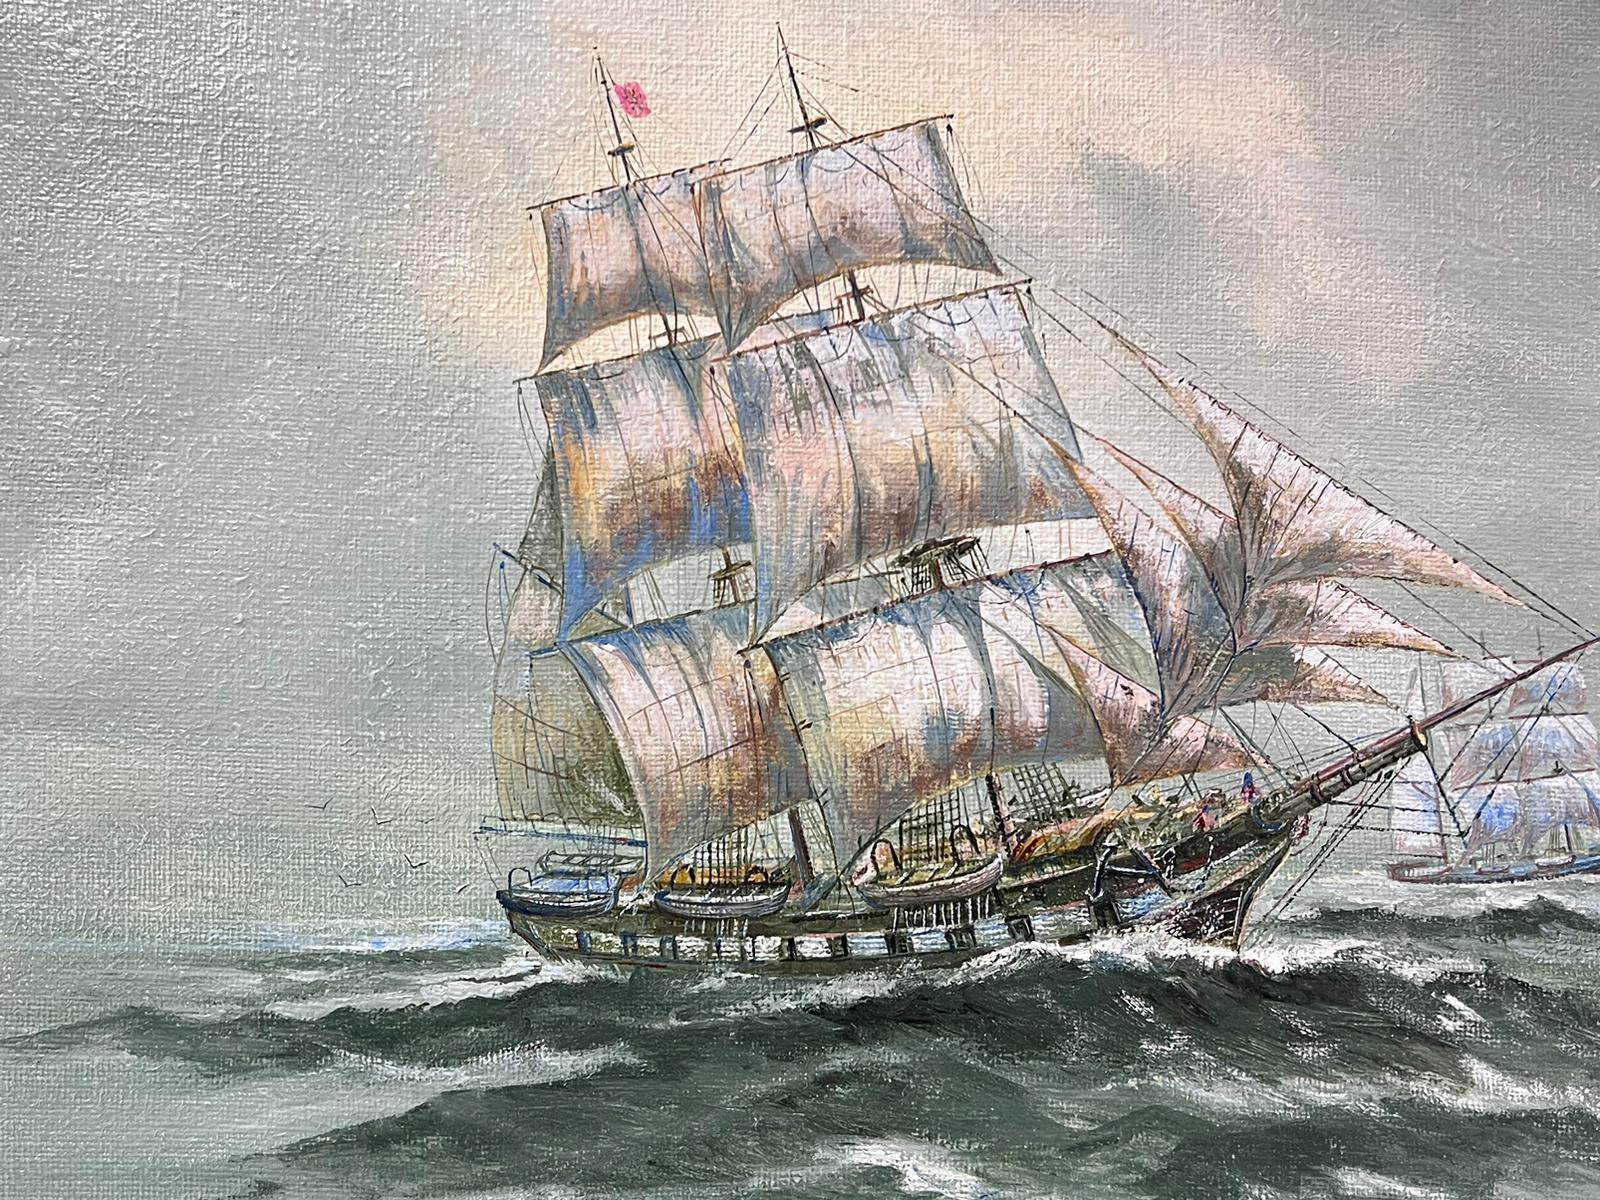 Old Whaling Ships
by Henry Woodward, British 20th century
signed oil painting on canvas, framed
inscribed verso
framed: 24.5 x 37.5 inches
canvas: 20.5 x 33.5 inches
provenance: private collection, Dorset, England
condition: very good and sound